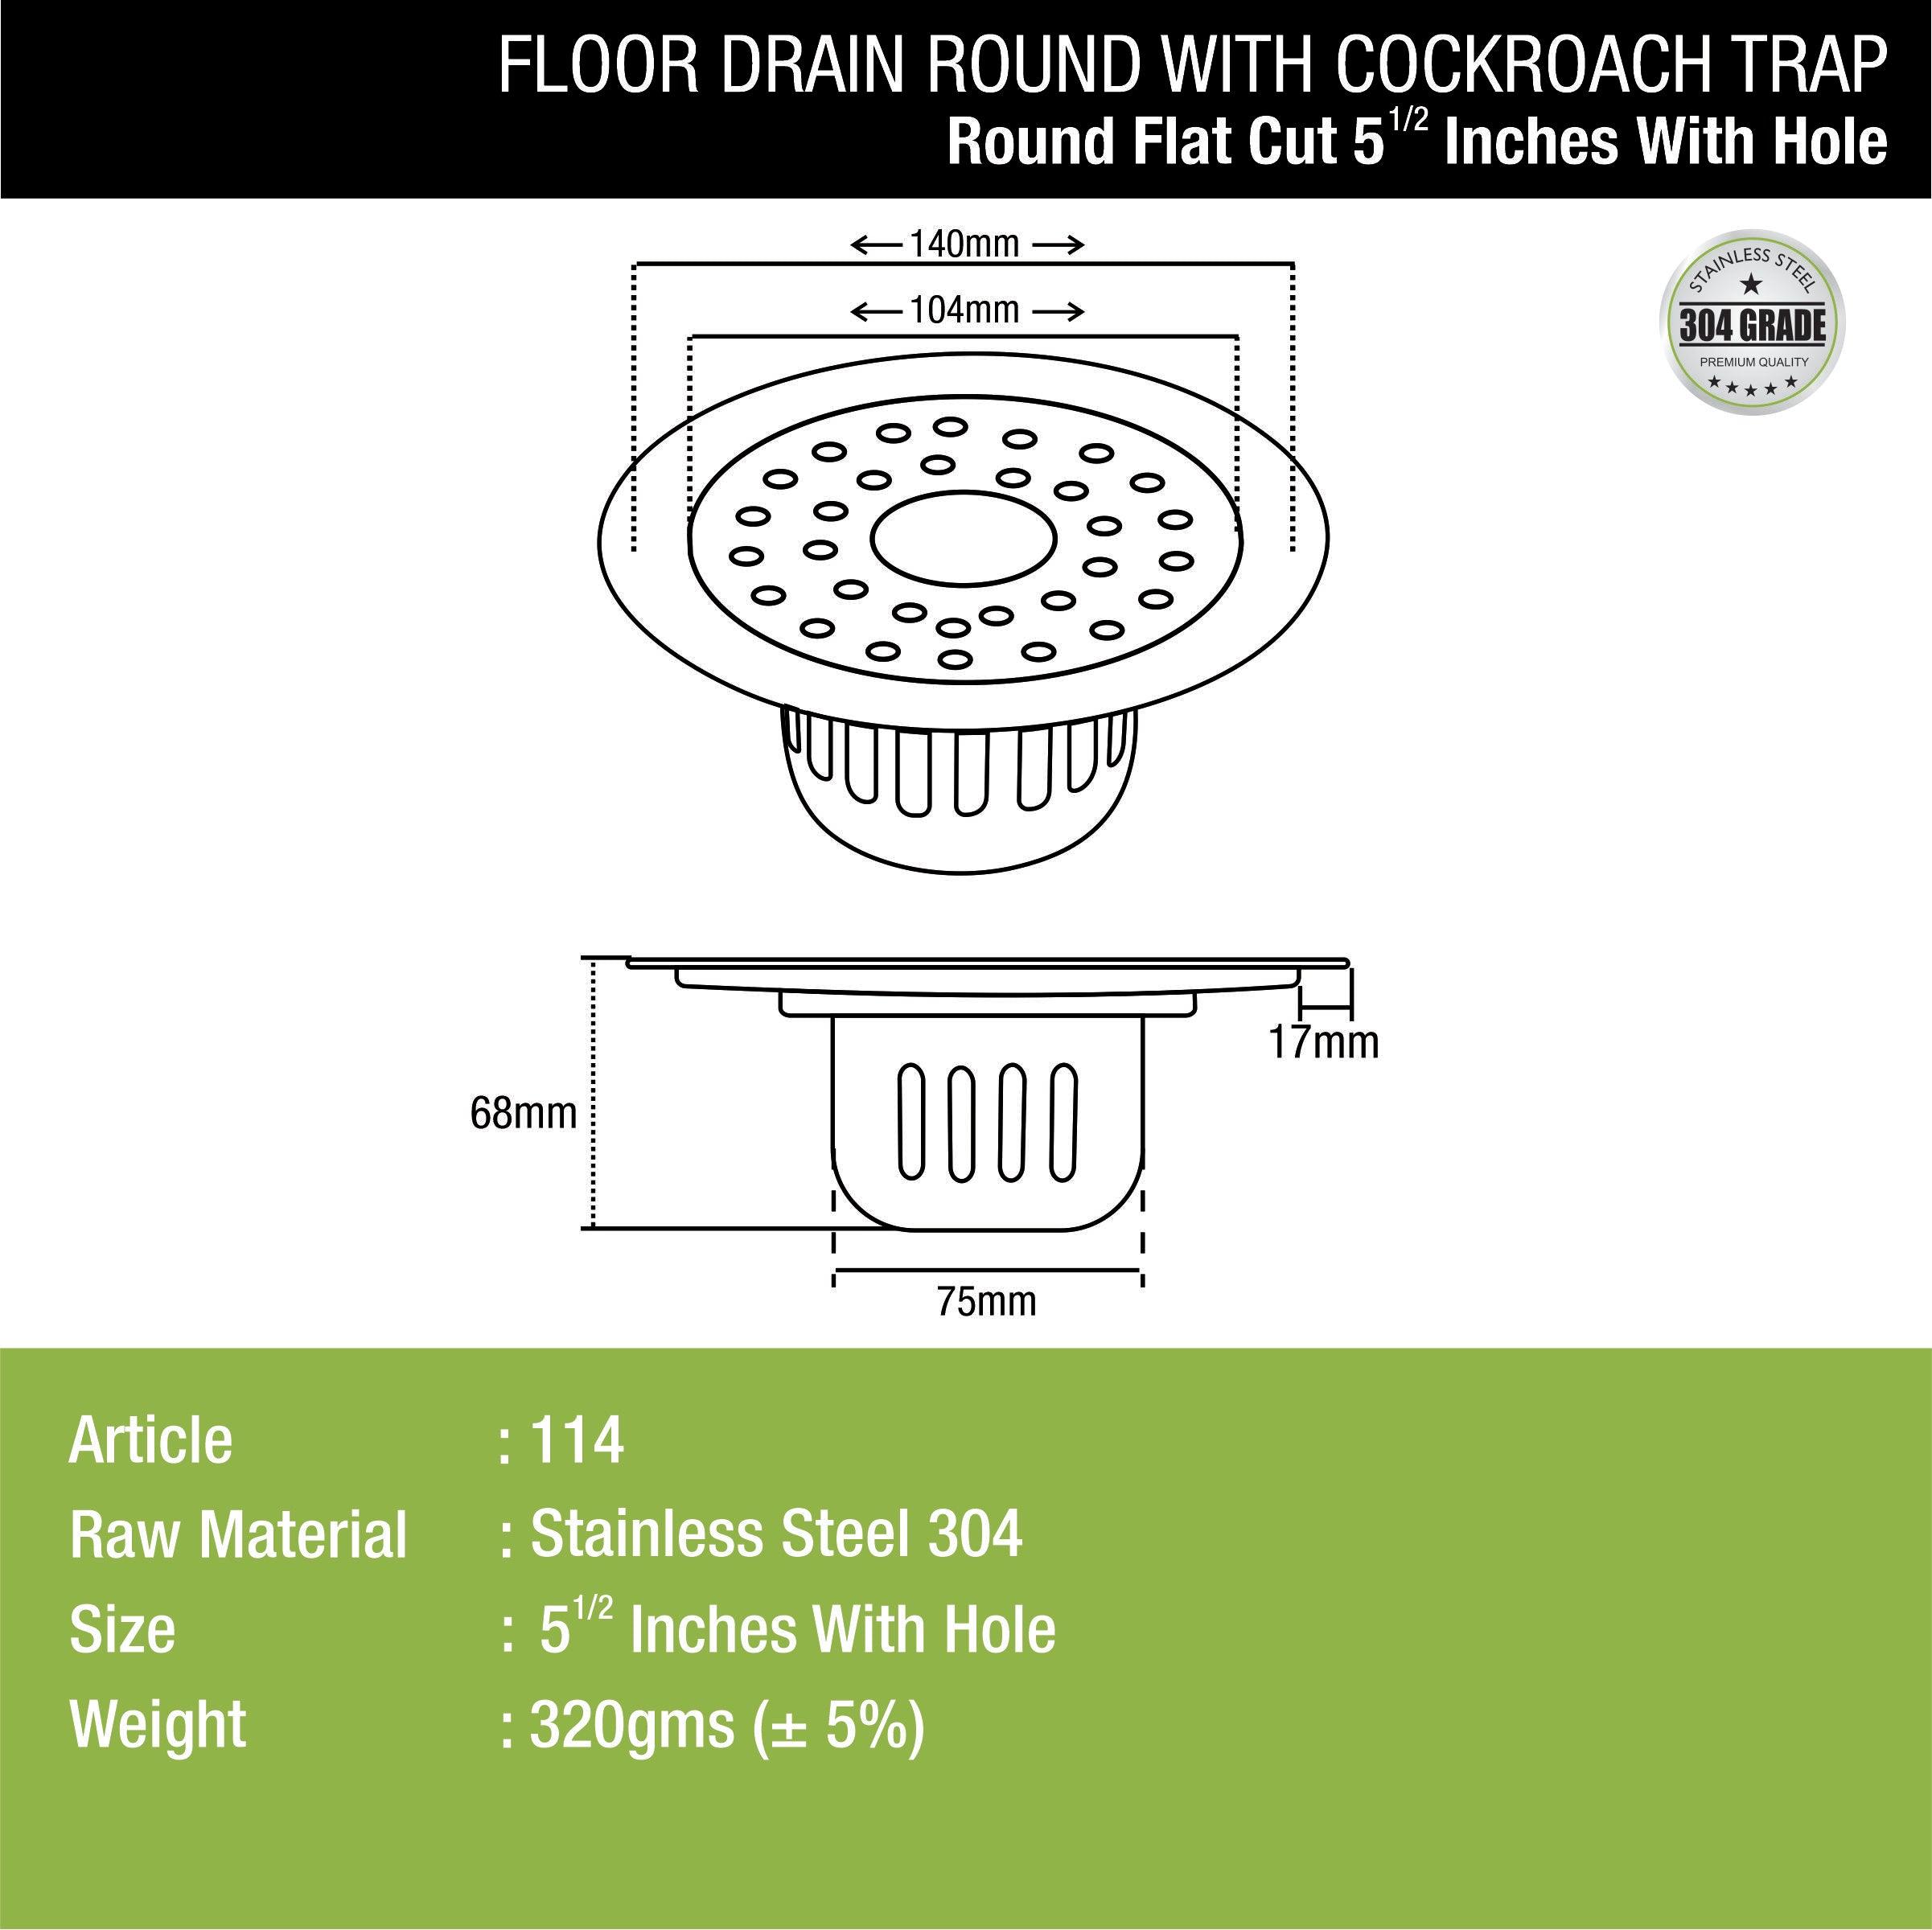 Round Flat Cut Floor Drain (5.5 inches) with Cockroach Trap & Hole dimensions and sizes